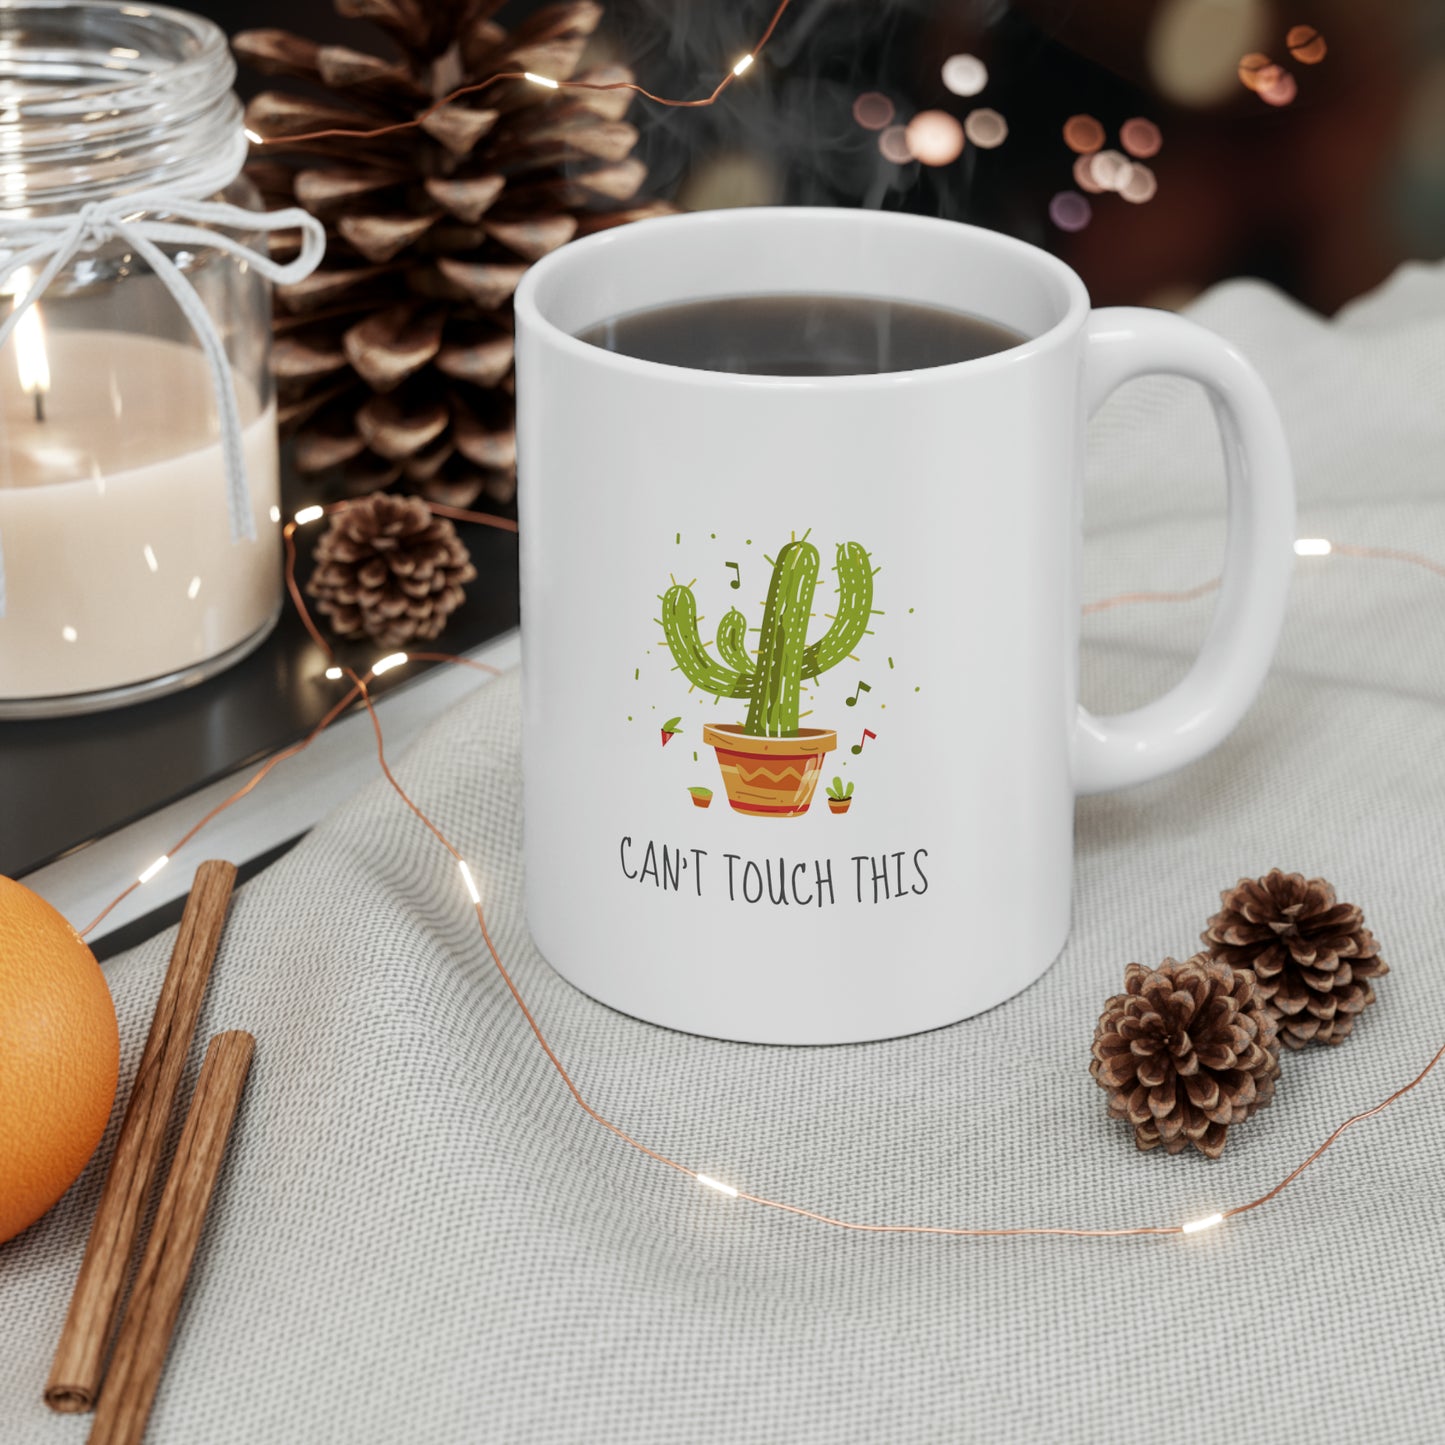 "Can't Touch This" Dancing Cactus Coffee Mug